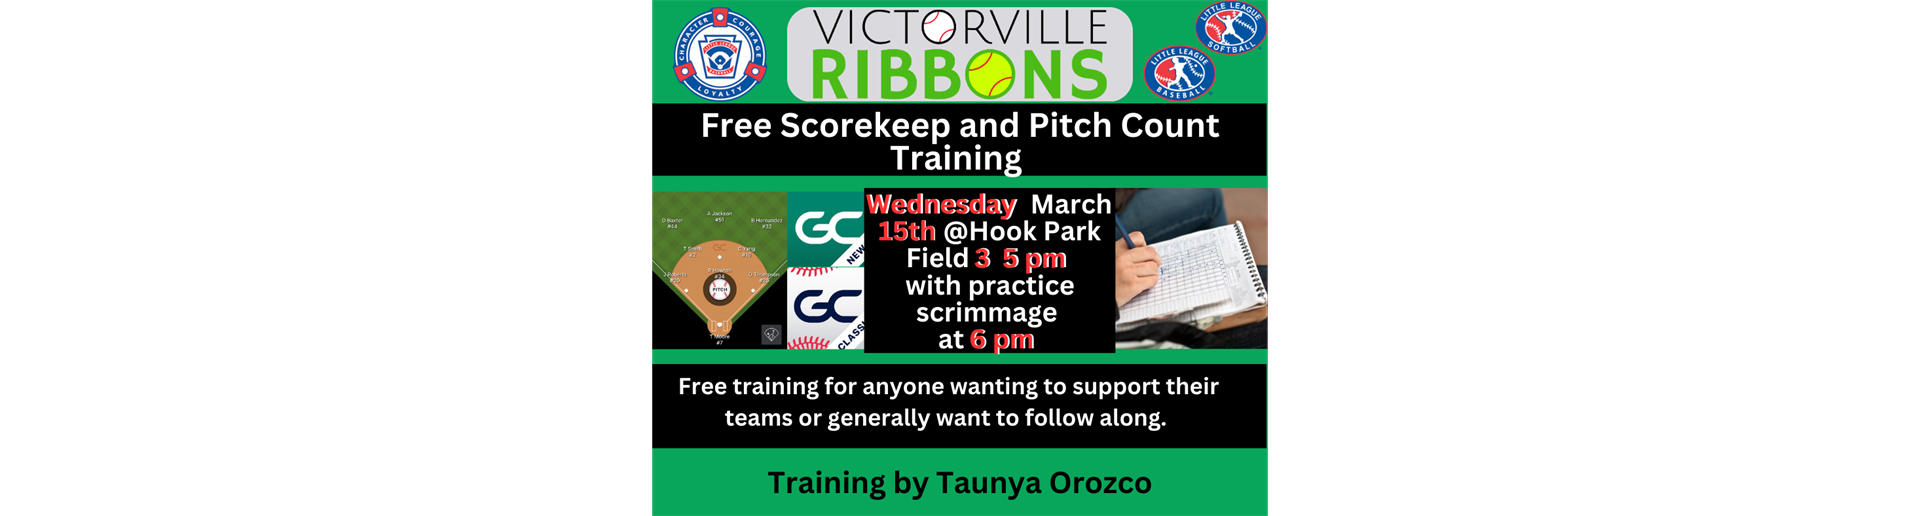 Free Scorekeeper and Pitch Count Clinic RESCHEDULED!